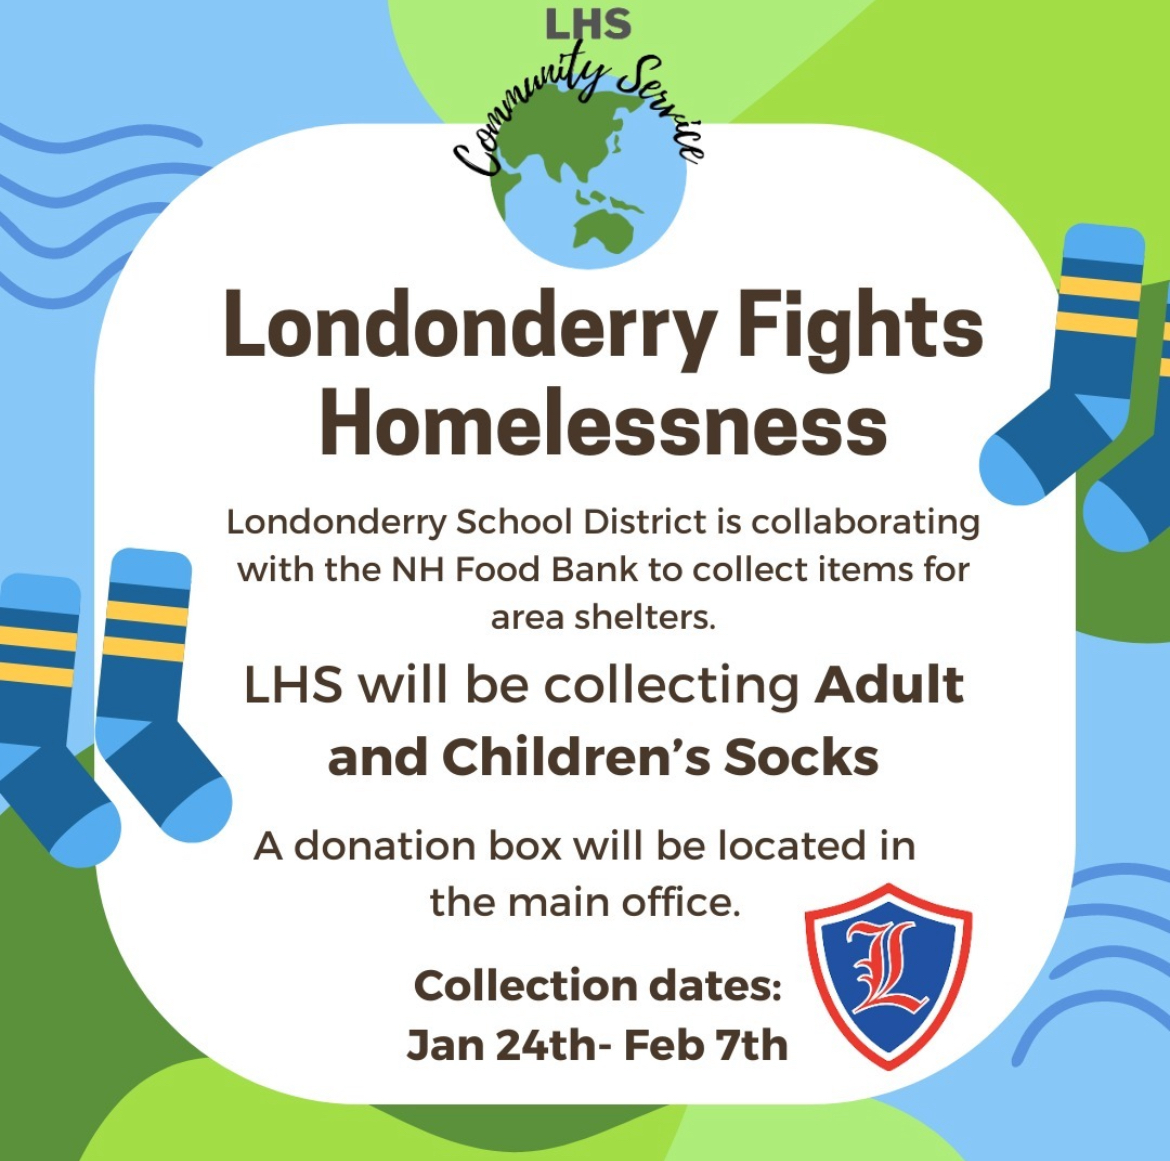 Community Service Club Fights Homelessness, and are collecting Adult and Childrens socks. 